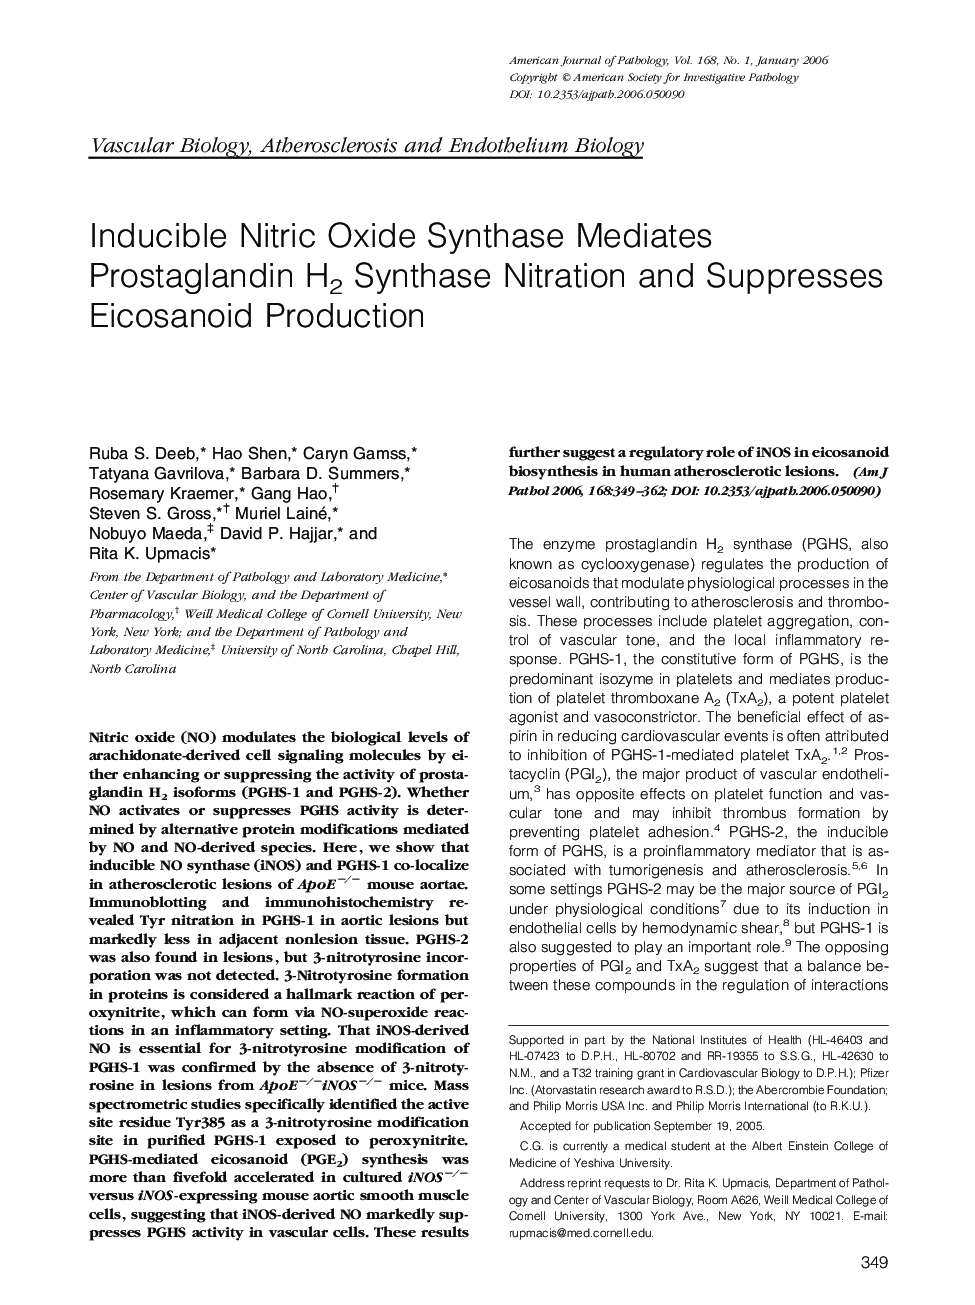 Regular ArticlesInducible Nitric Oxide Synthase Mediates Prostaglandin H2 Synthase Nitration and Suppresses Eicosanoid Production